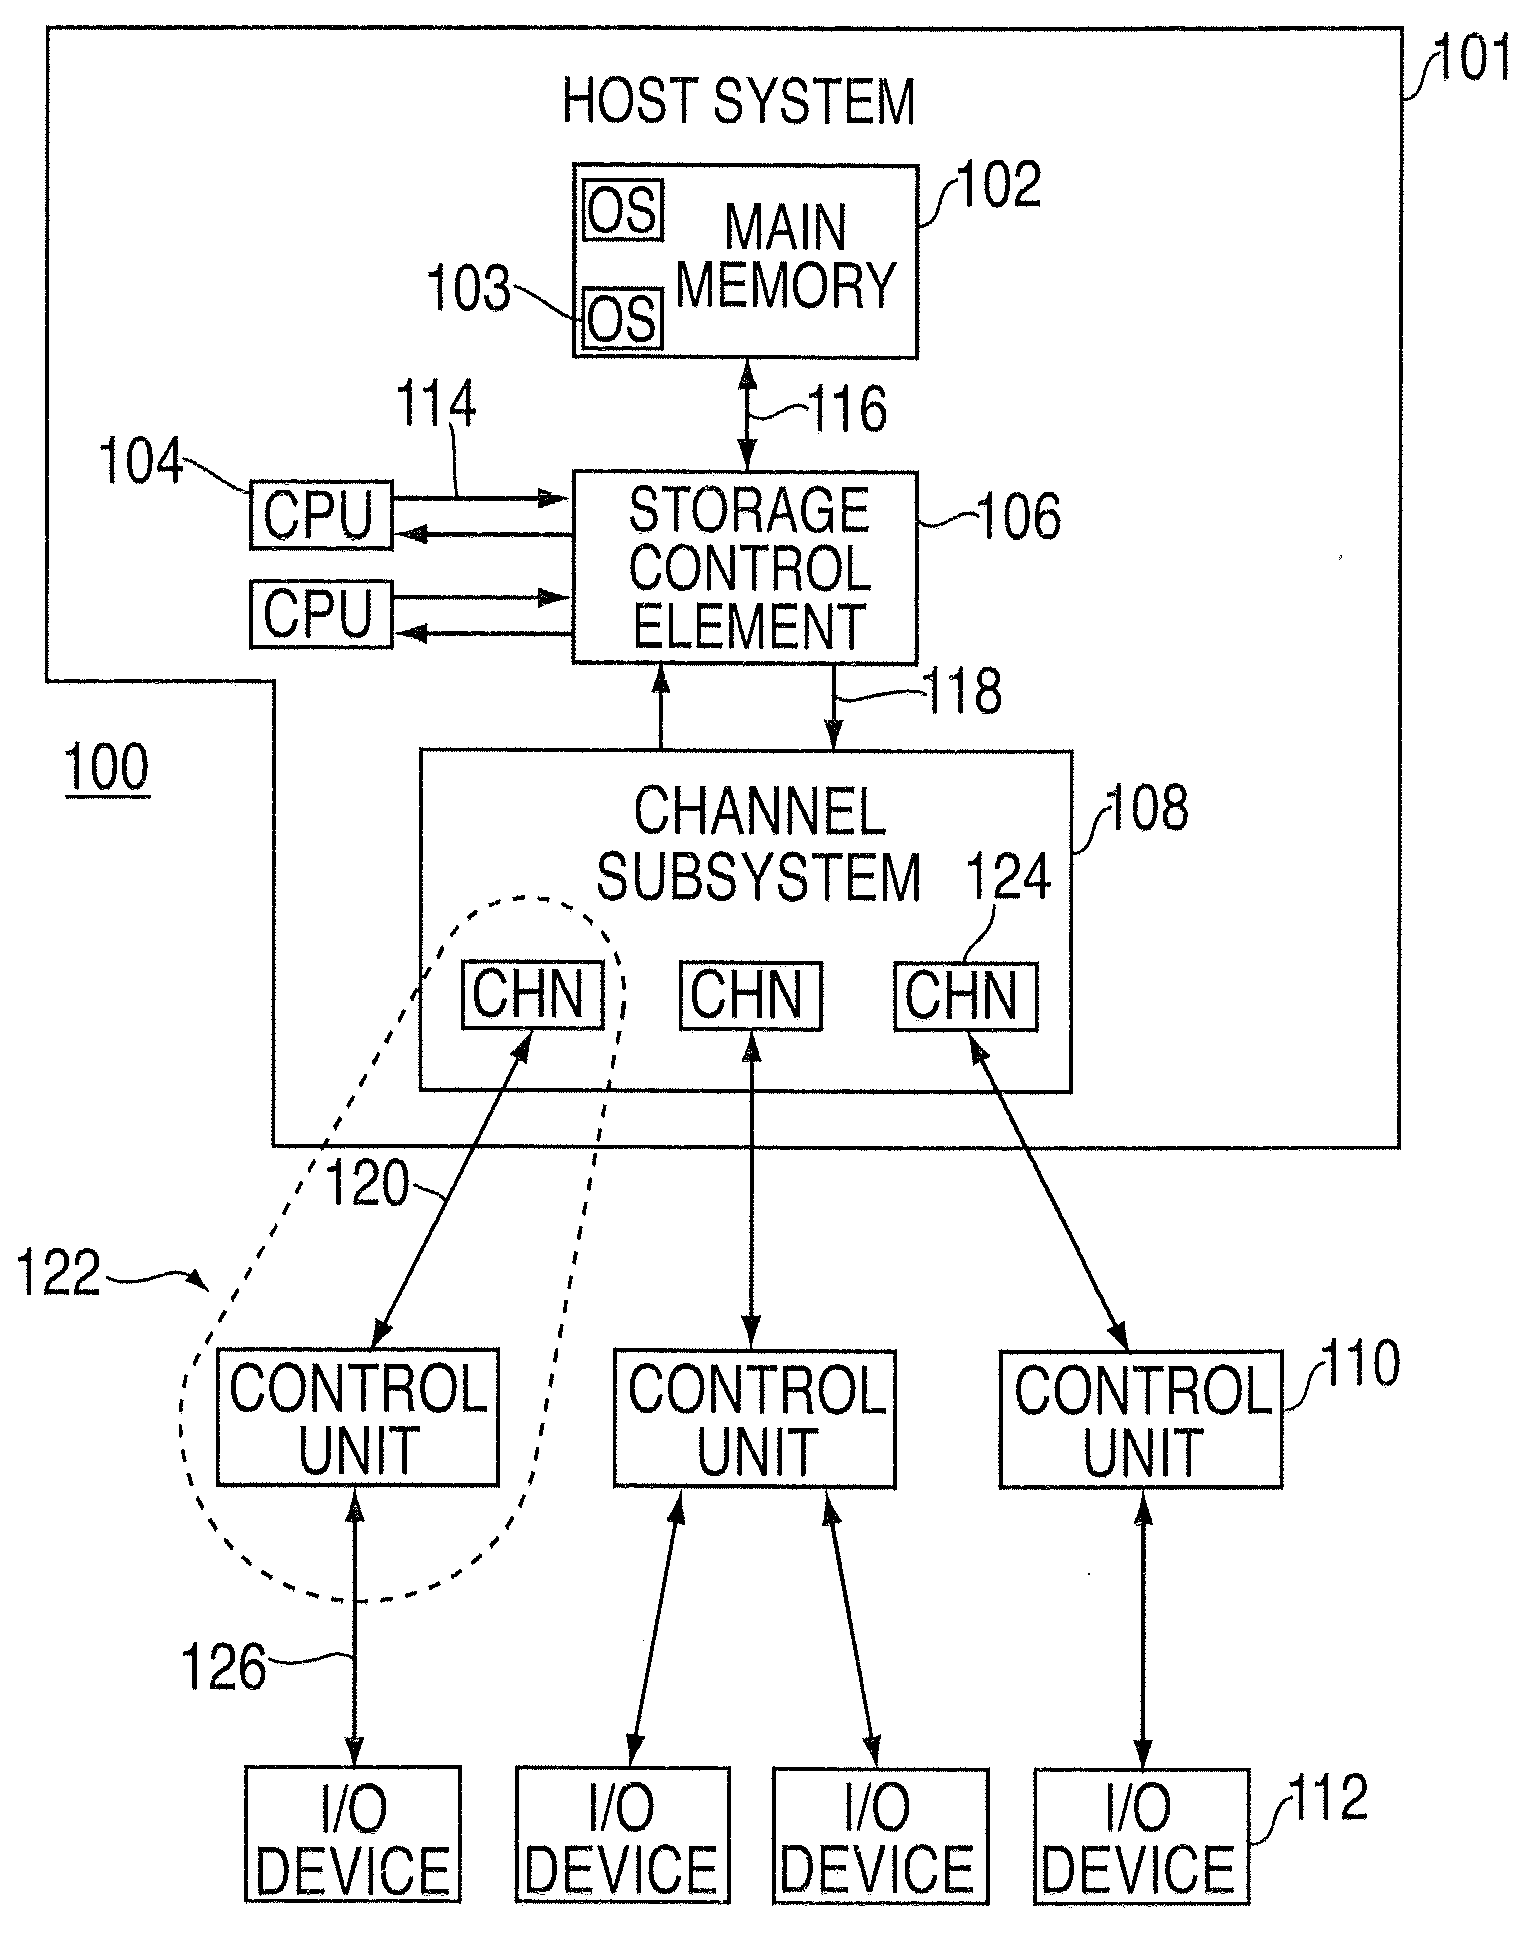 Processing of data to suspend operations in an input/output processing system